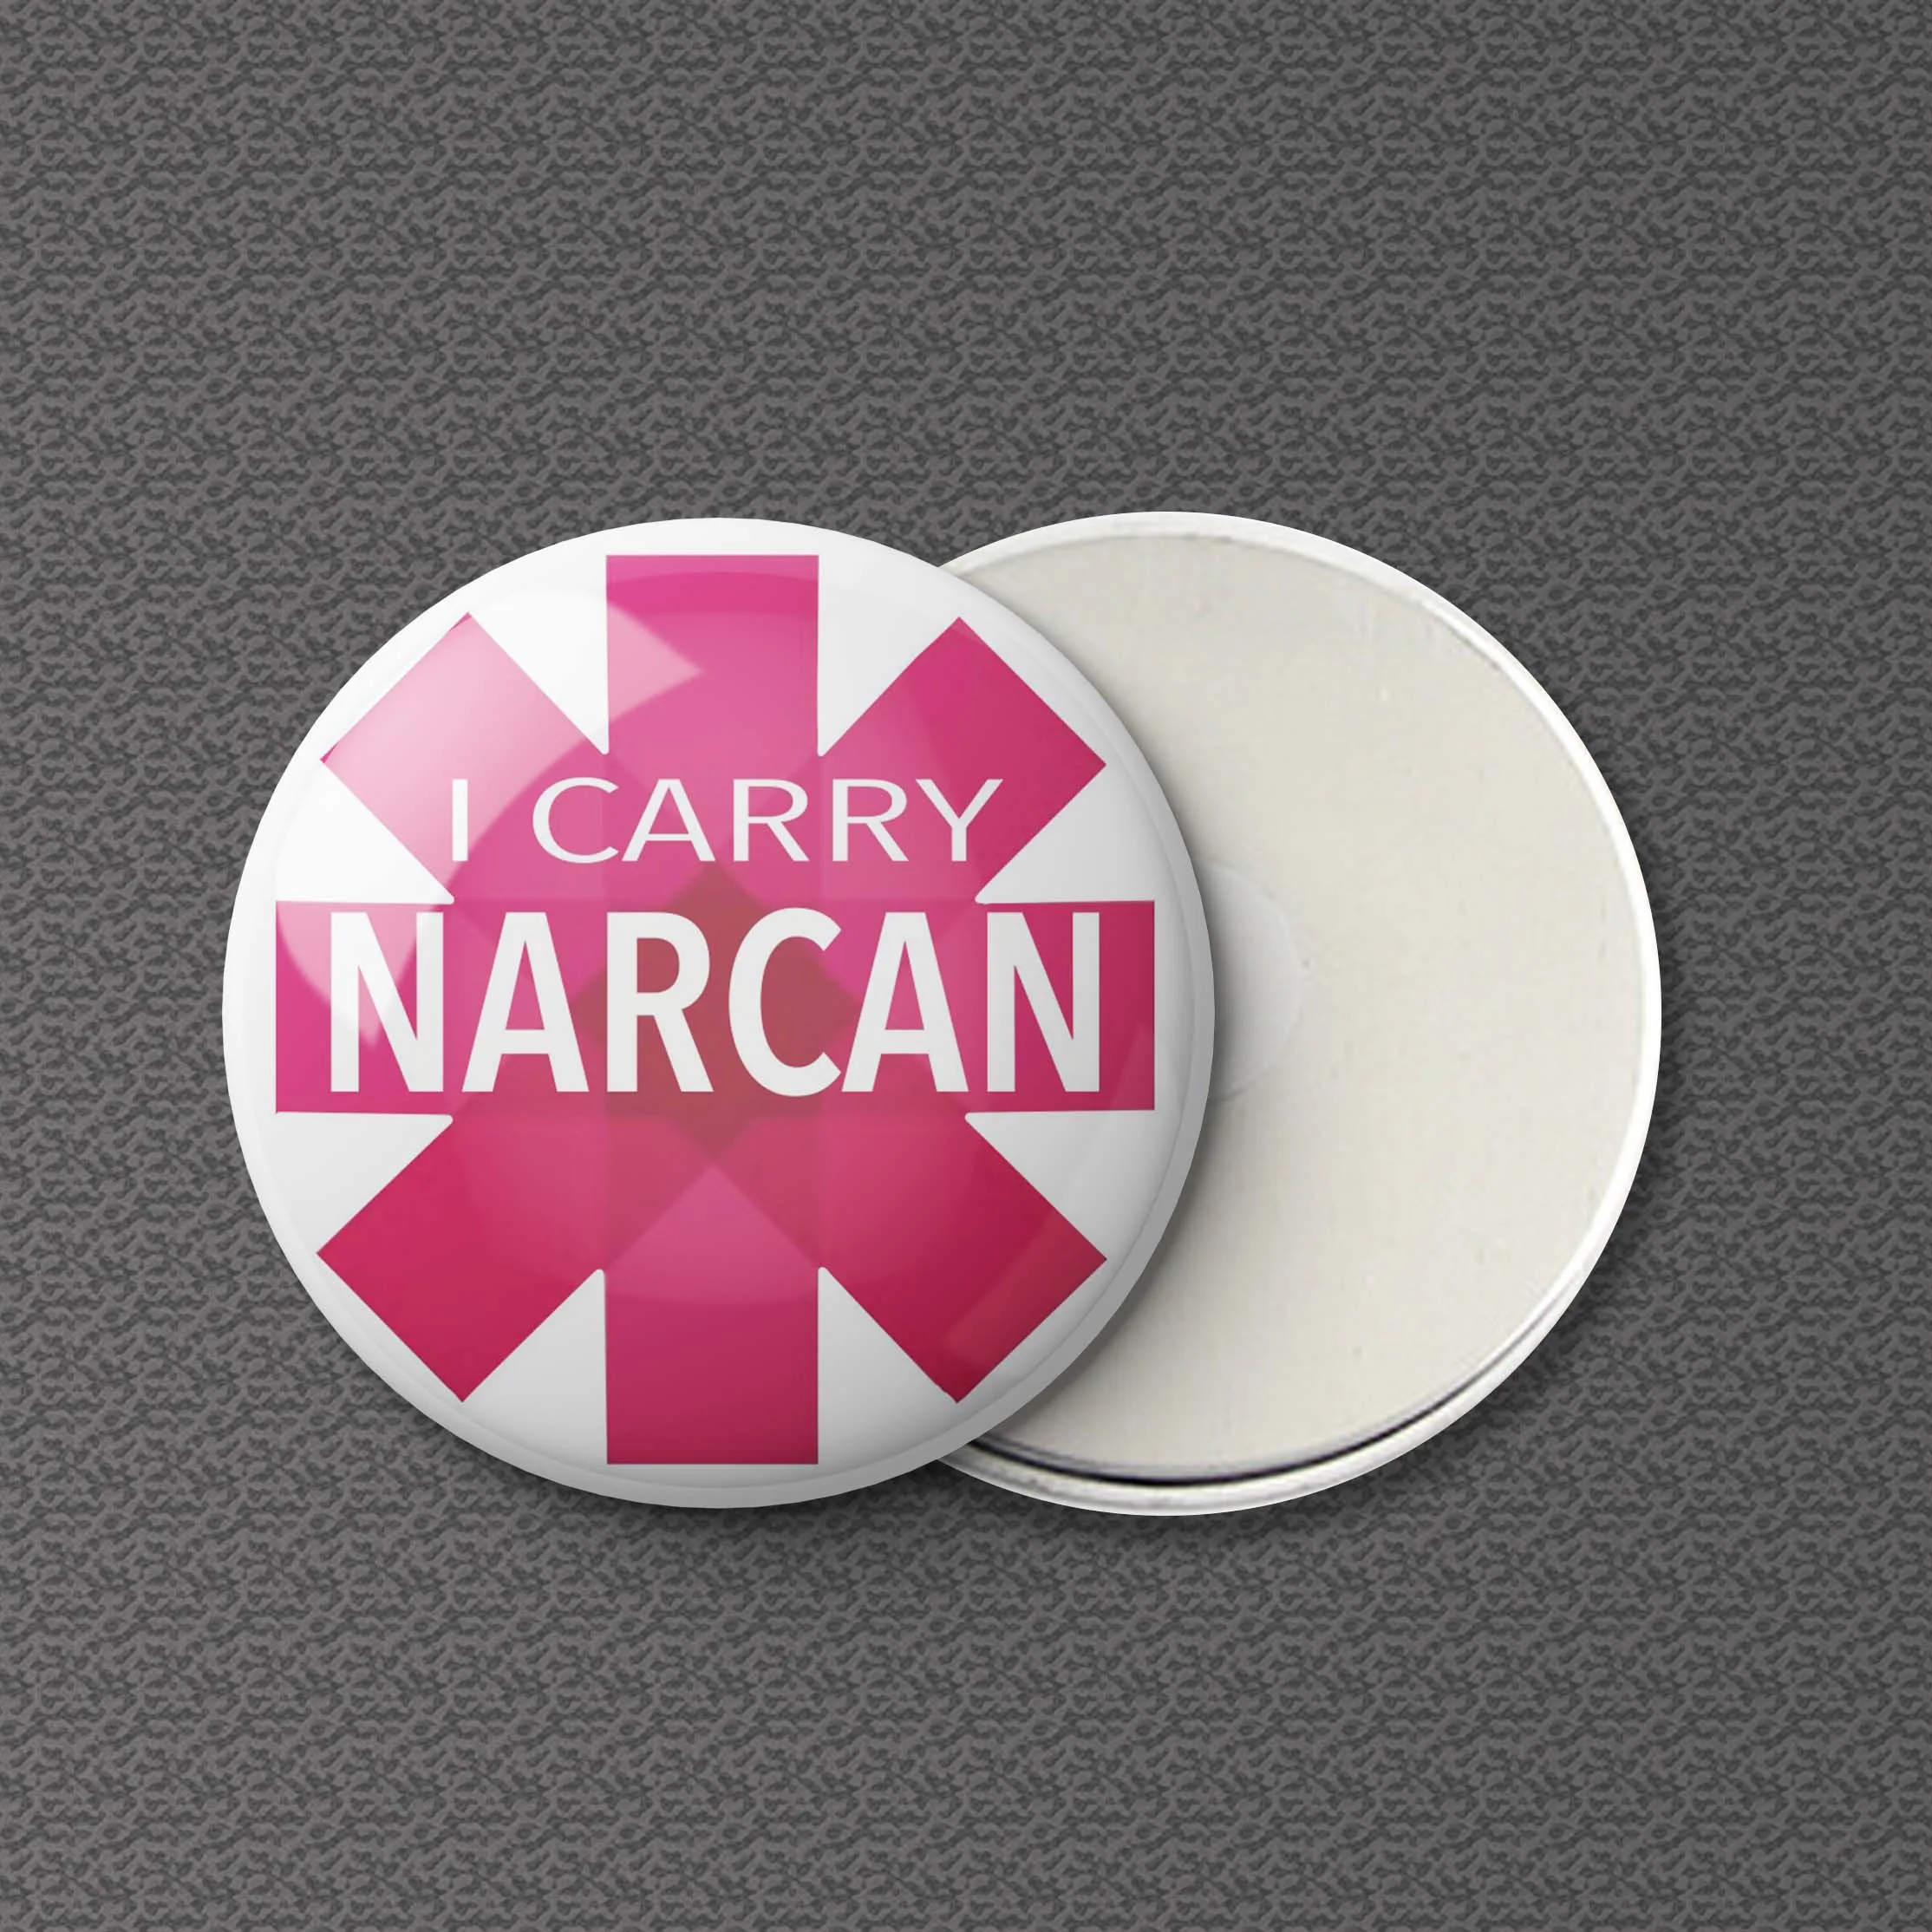 

Carry Narcan Save A Life Refrigerator Magnet Home Lover Fashion Metal Cartoon Decor Board Kitchen Cute Funny Jewelry Magnetic